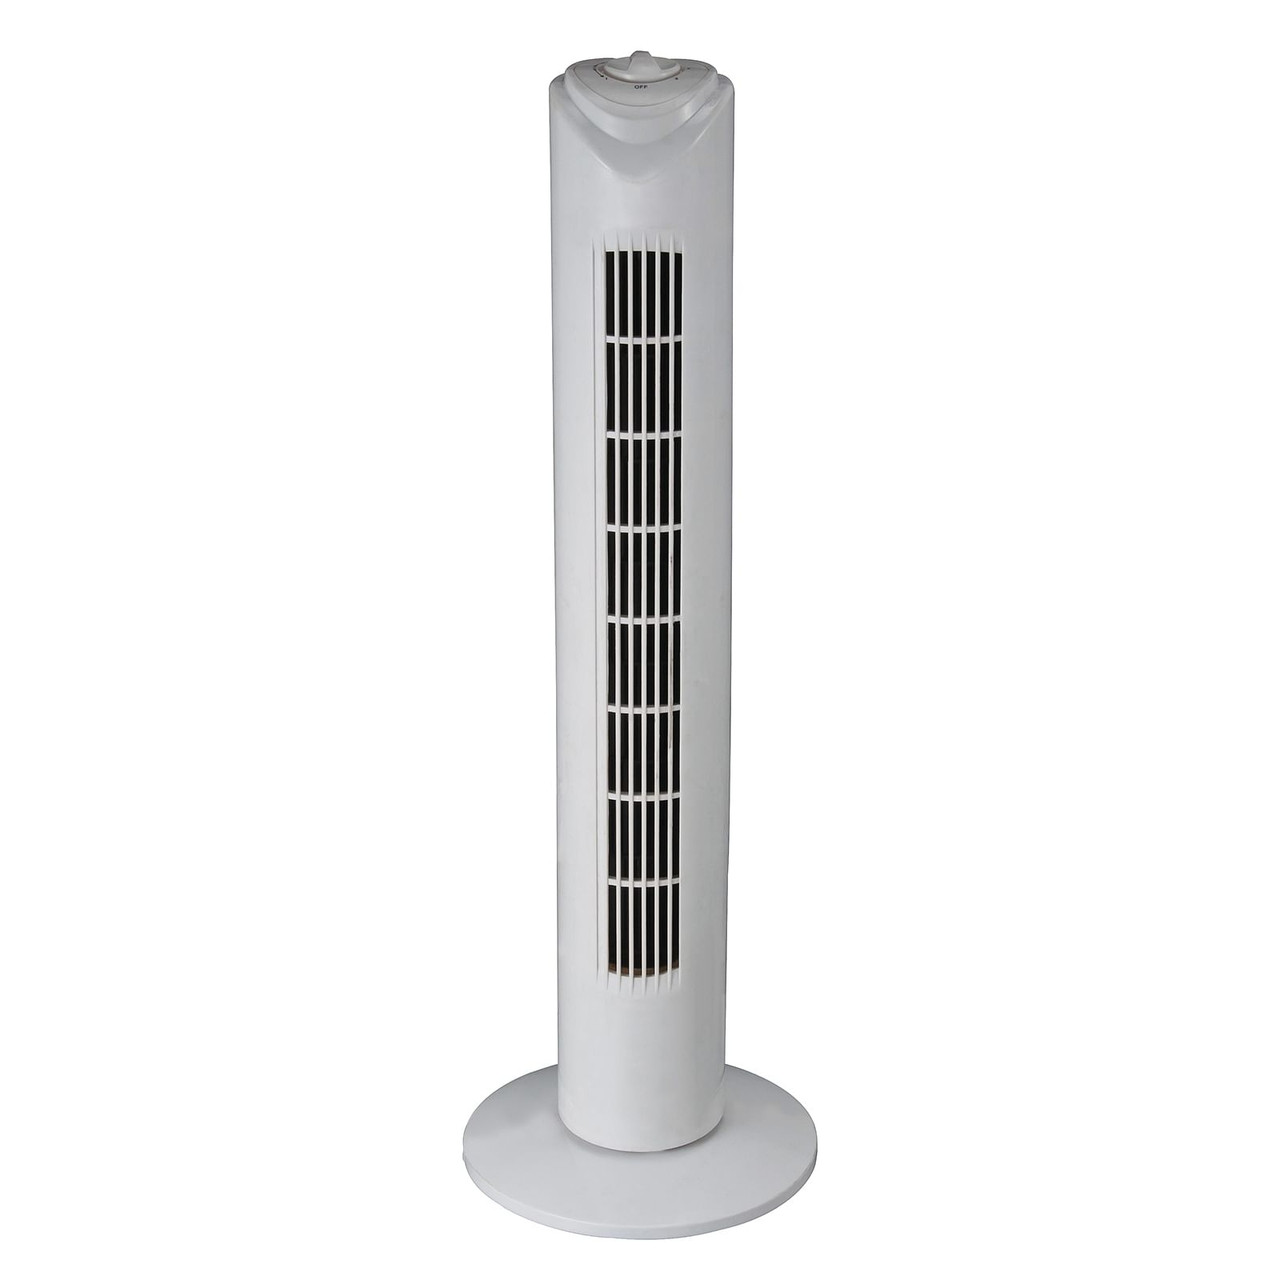 Optimus 32 in. Oscillating Tower Fan in White